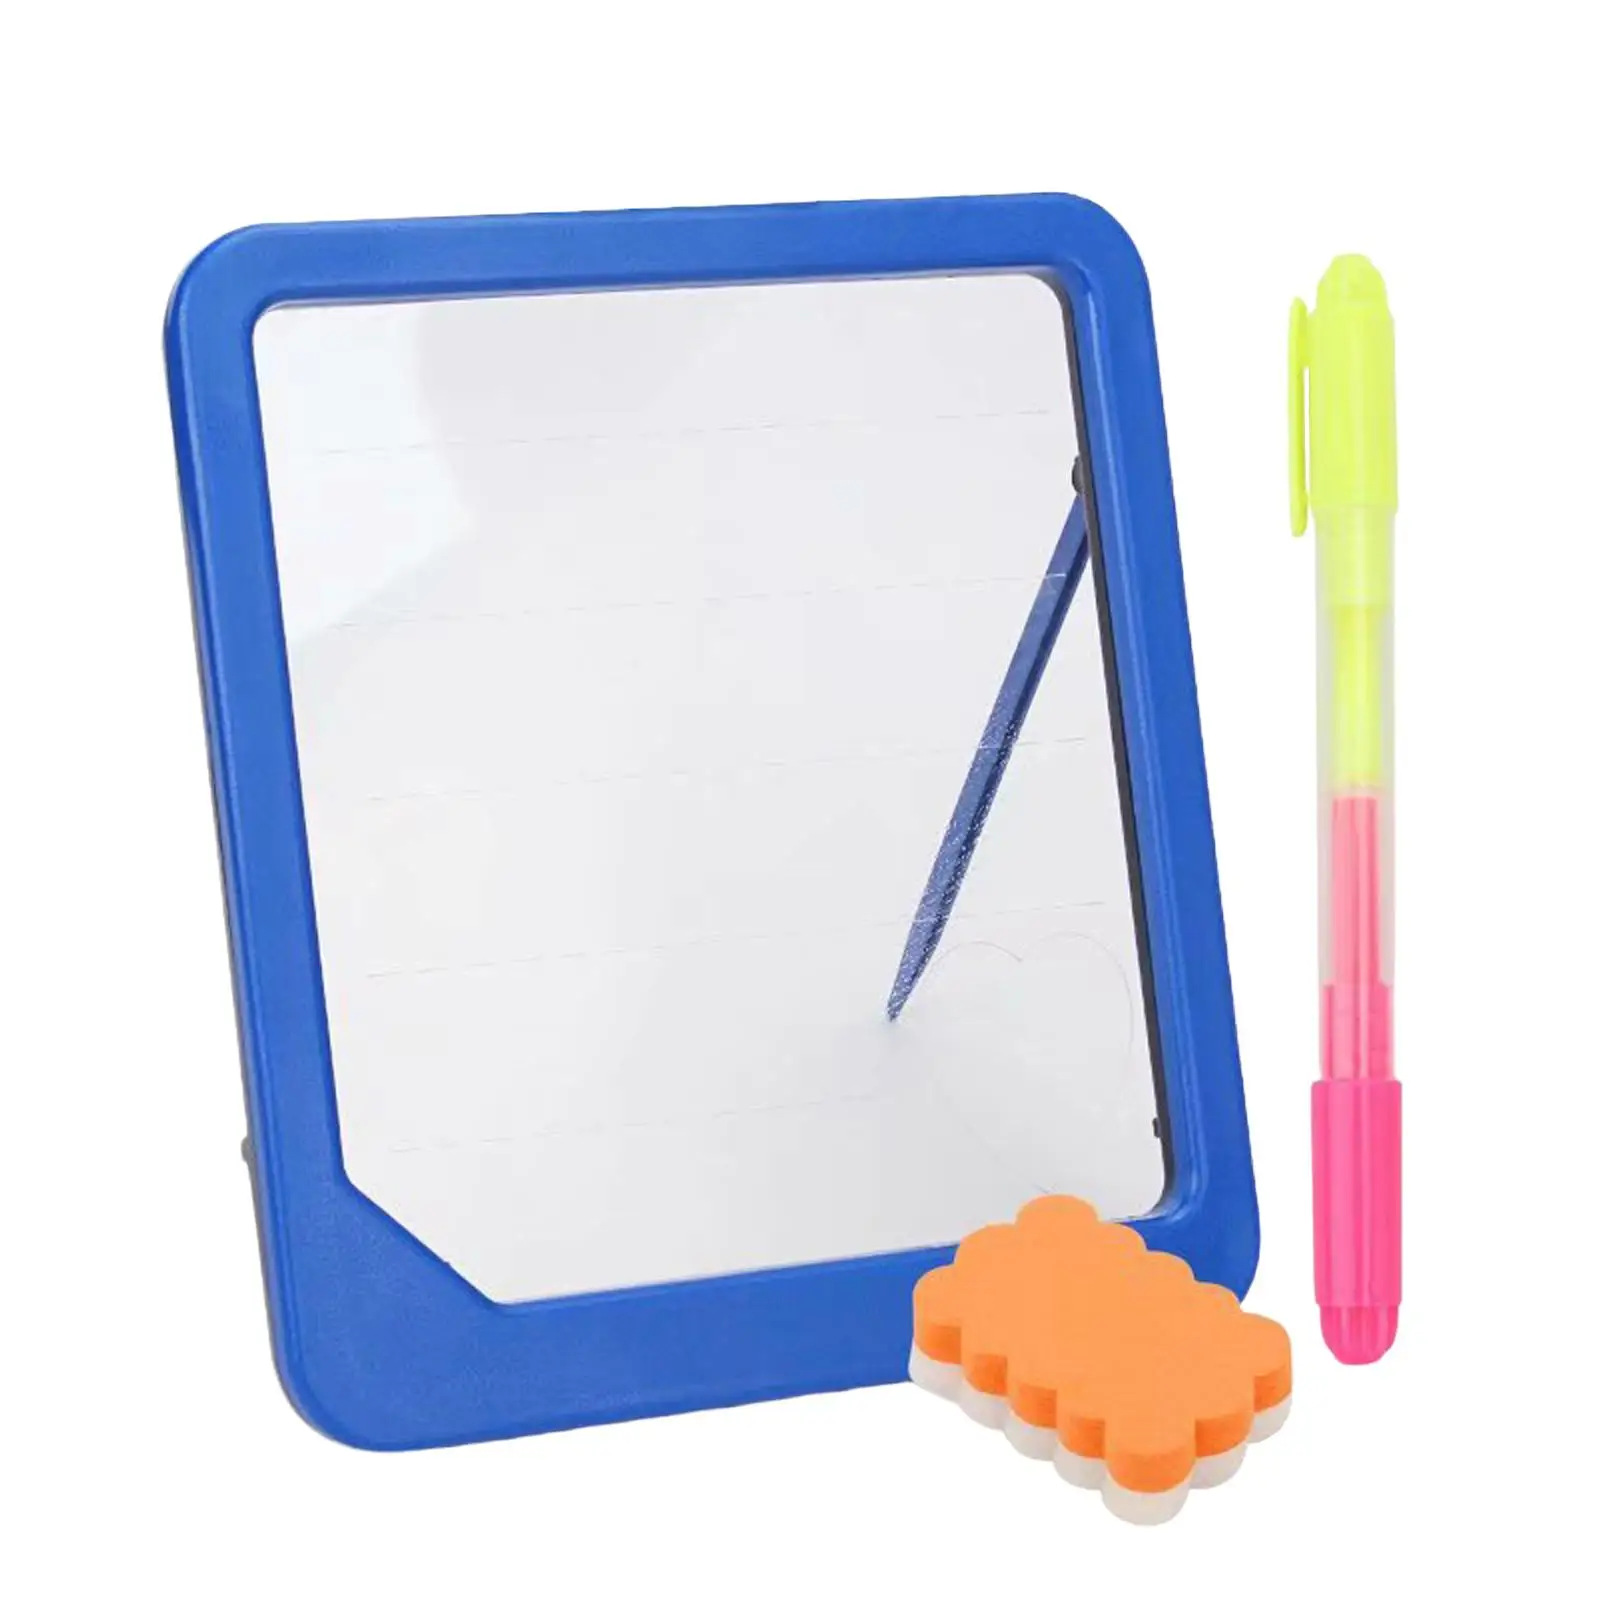 Writing Board Light up Drawing Board Science and Educational Toys Handwriting Child Sensory Educational Toy for Students Kids